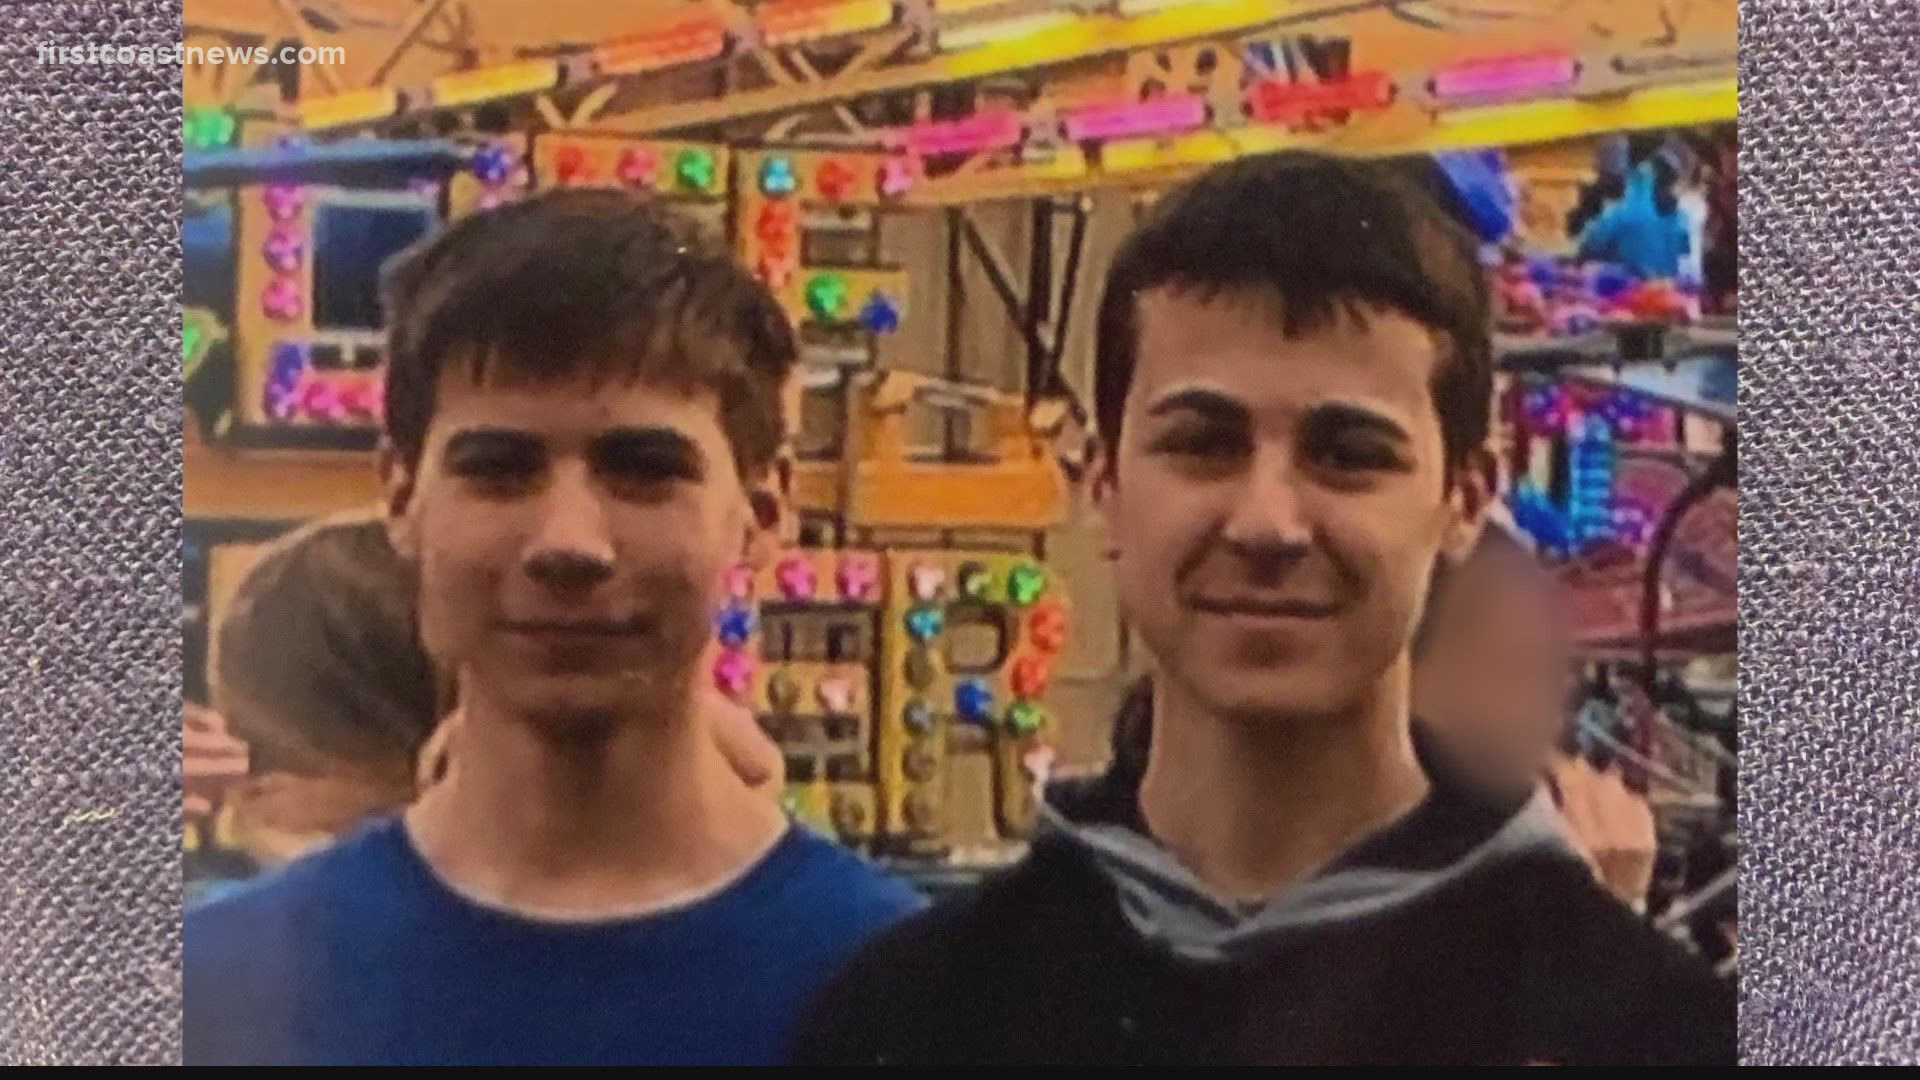 Luke Kennedy, 16, and Parker Rowley, 17, died after their sedan collided with a pickup truck on State Road 16 on Oct. 9.